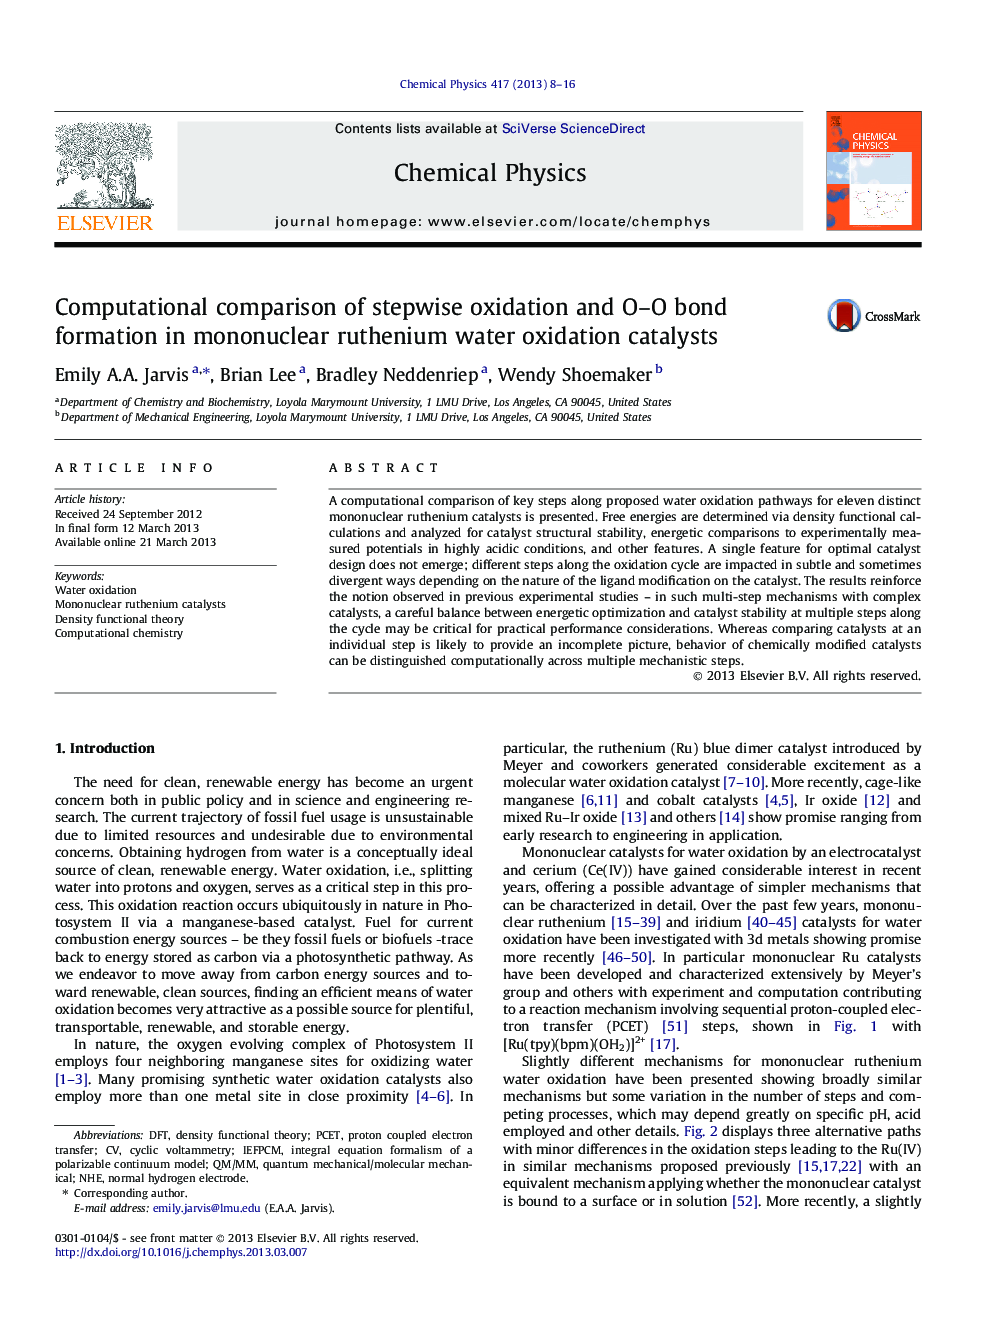 Computational comparison of stepwise oxidation and O-O bond formation in mononuclear ruthenium water oxidation catalysts